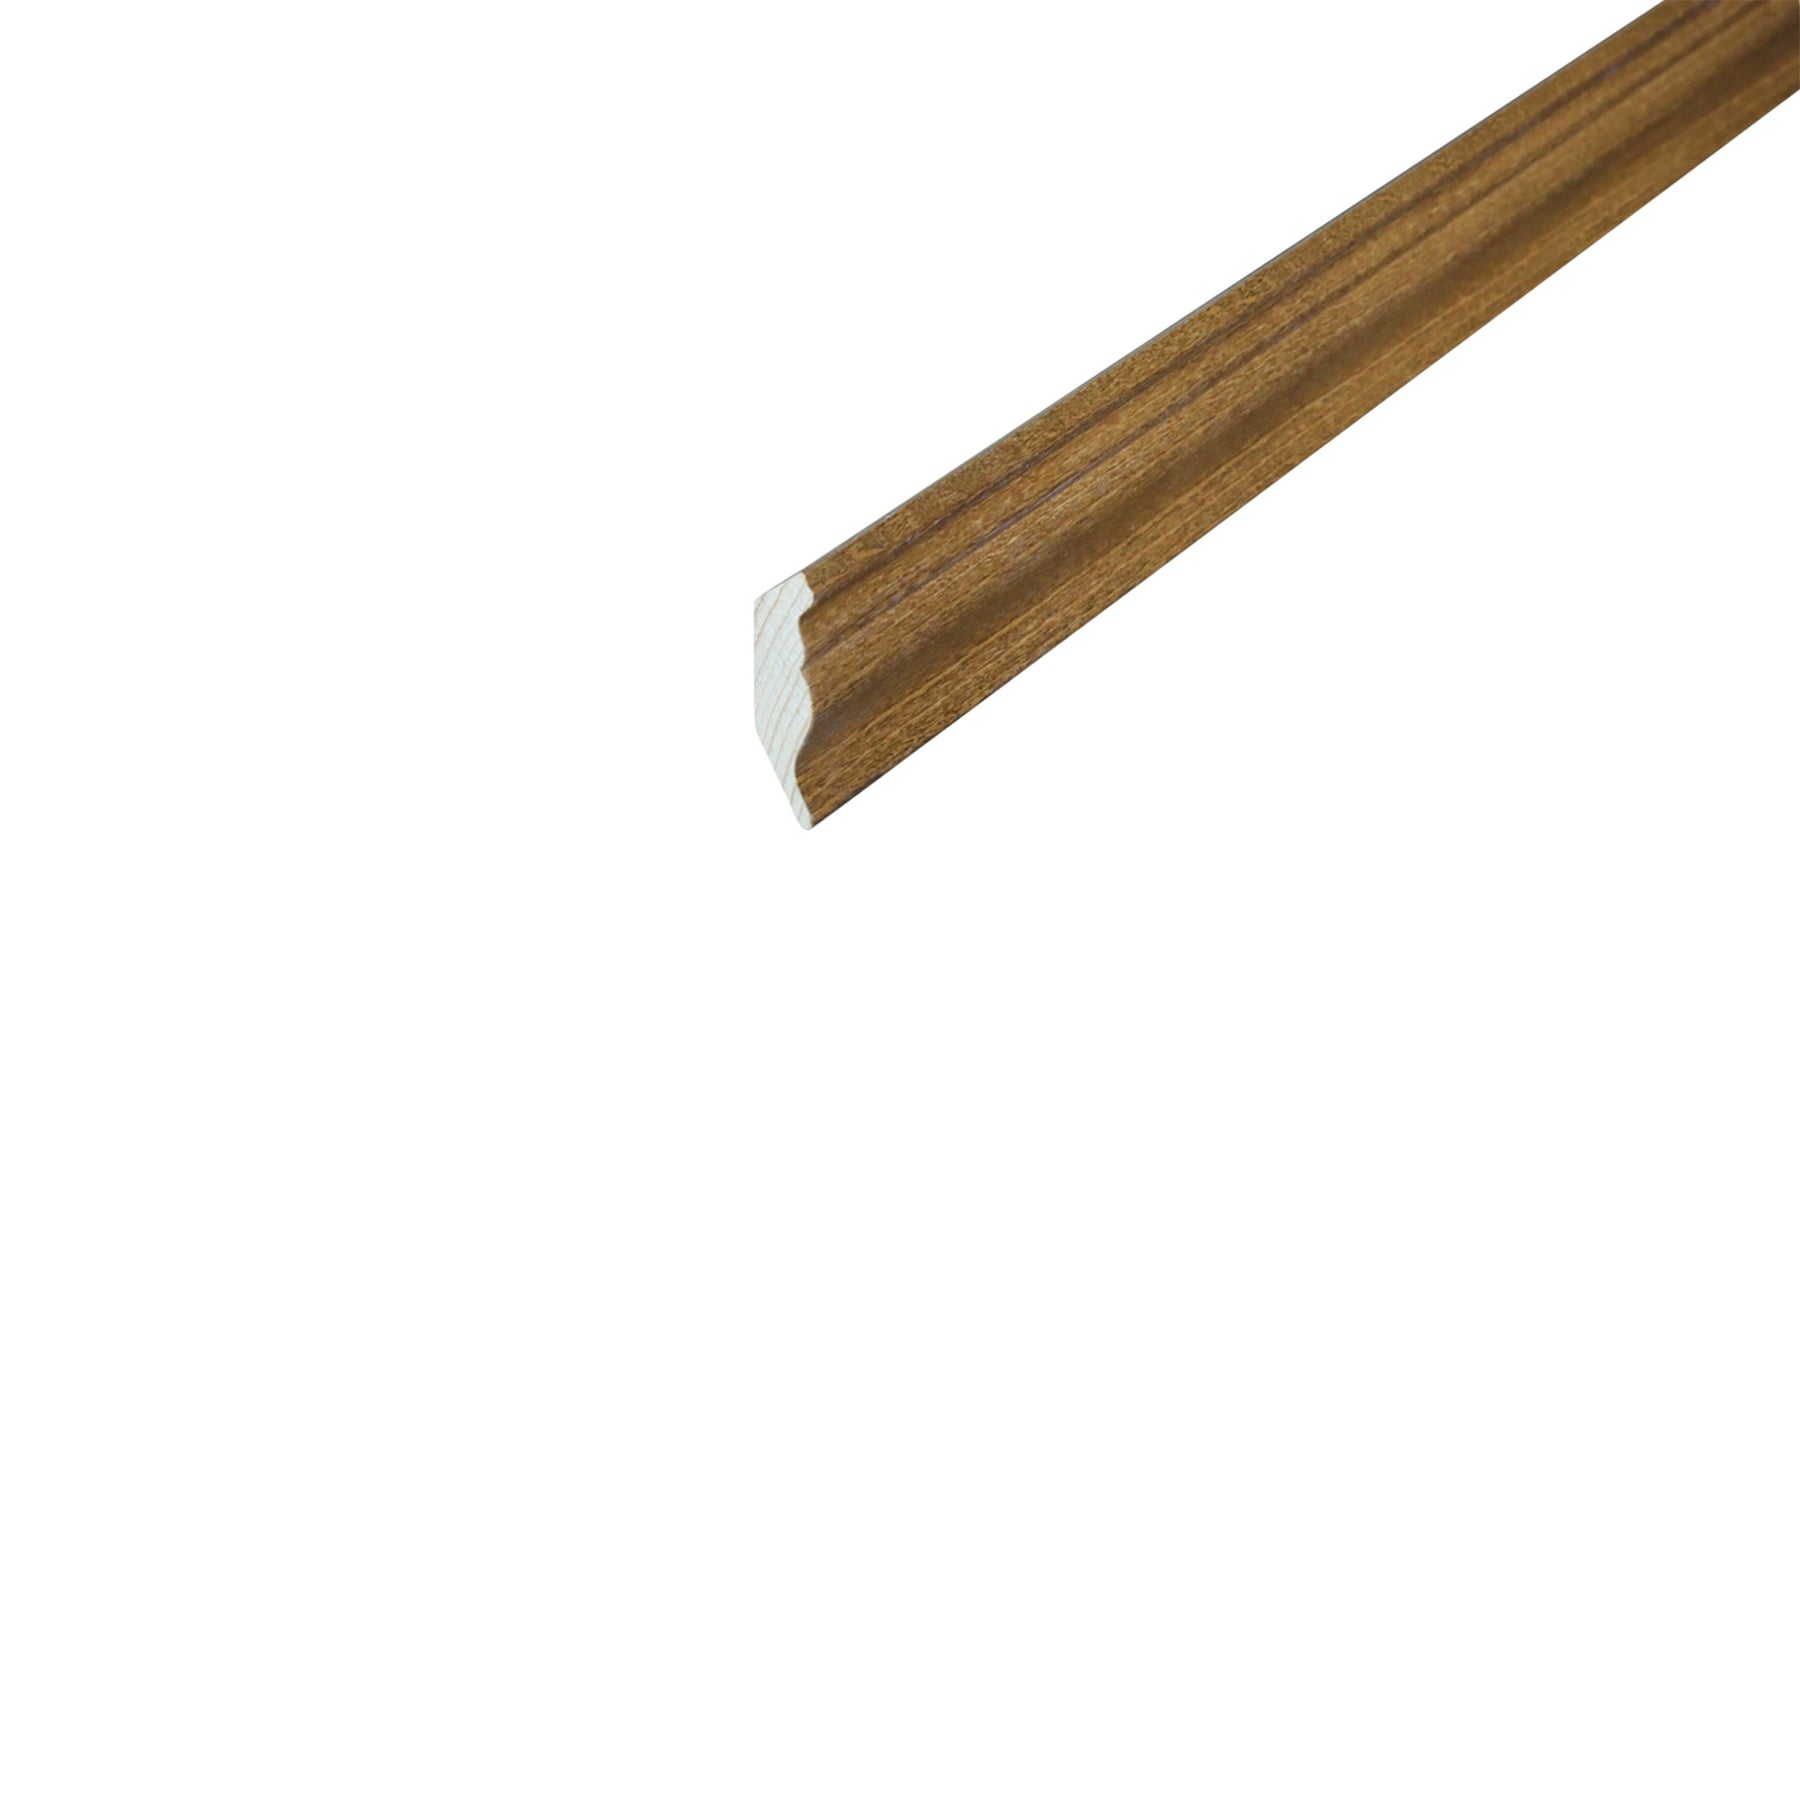 Small Crown Molding - 1-3/16 Inch x 1-3/16 Inch x 96 Inch - Warmwood Shaker - Kitchen Cabinet